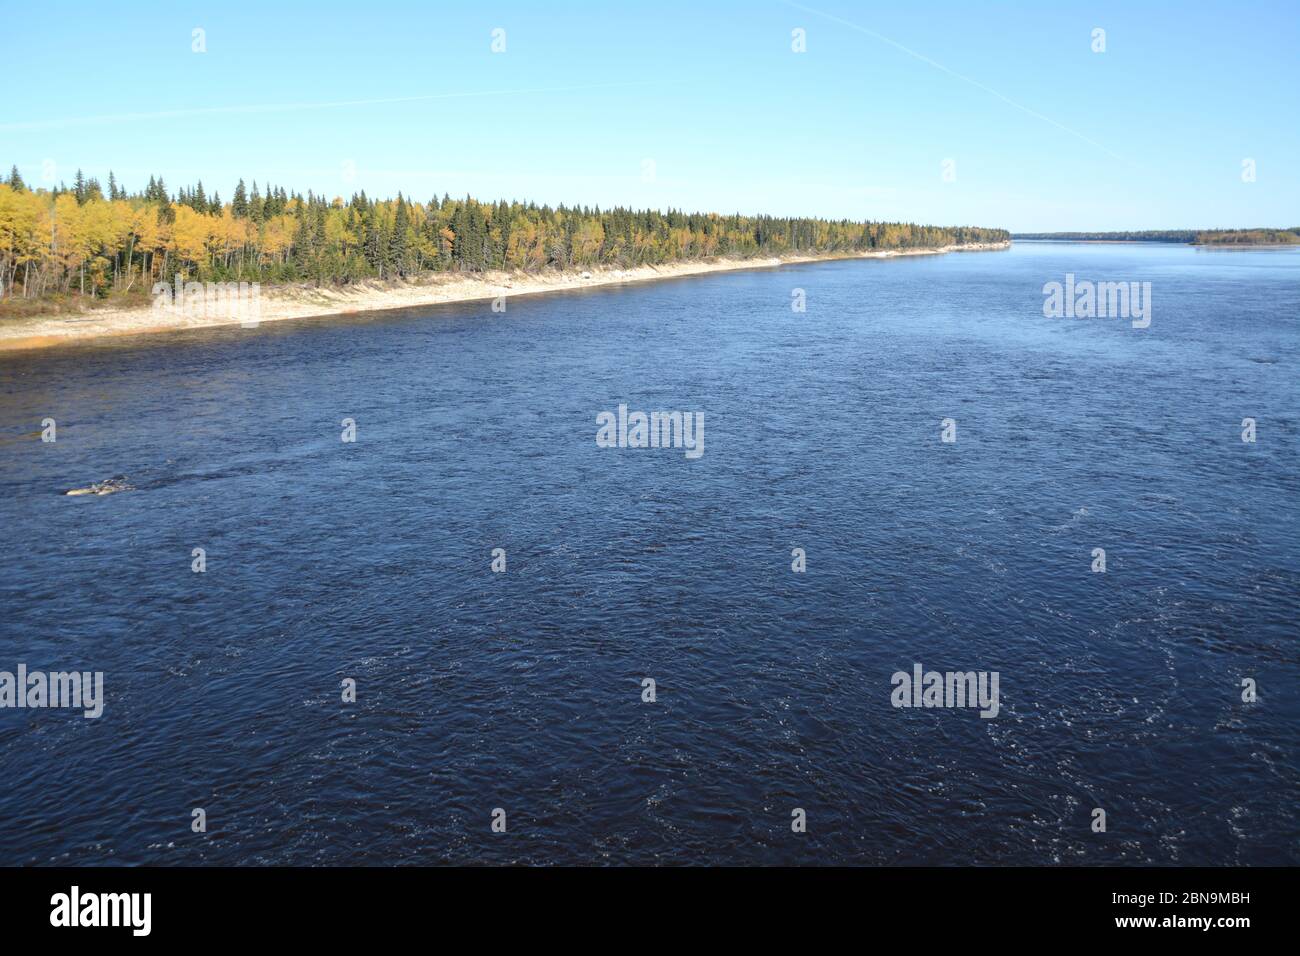 The Moose River which flows north into James Bay, near the indigenous Cree towns of Moosonee and Moose Factory, northern Ontario, Canada. Stock Photo